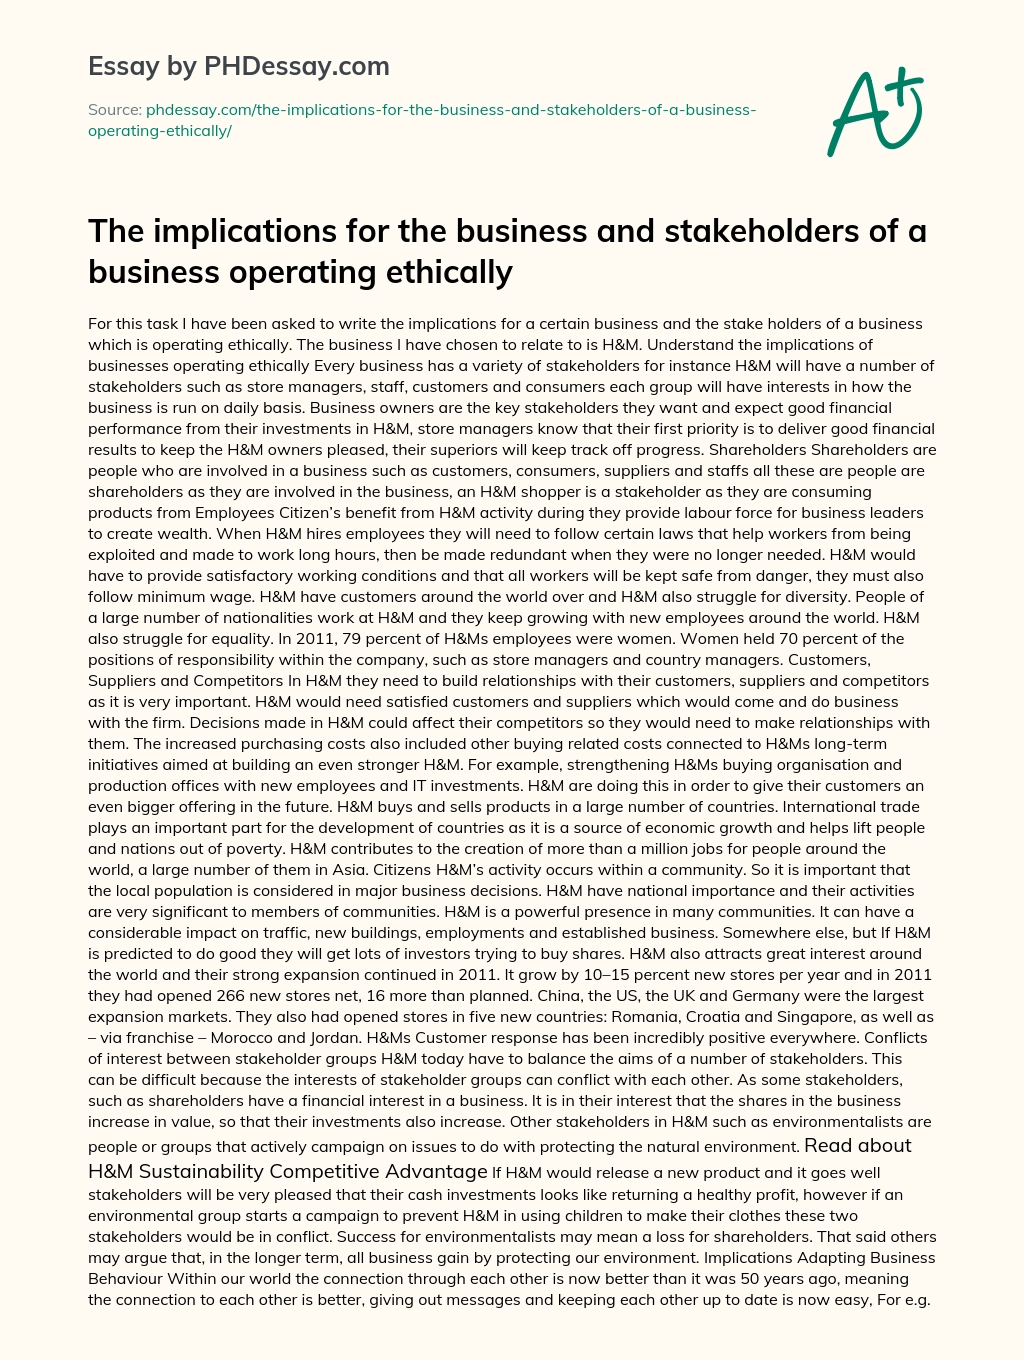 The implications for the business and stakeholders of a business operating ethically essay